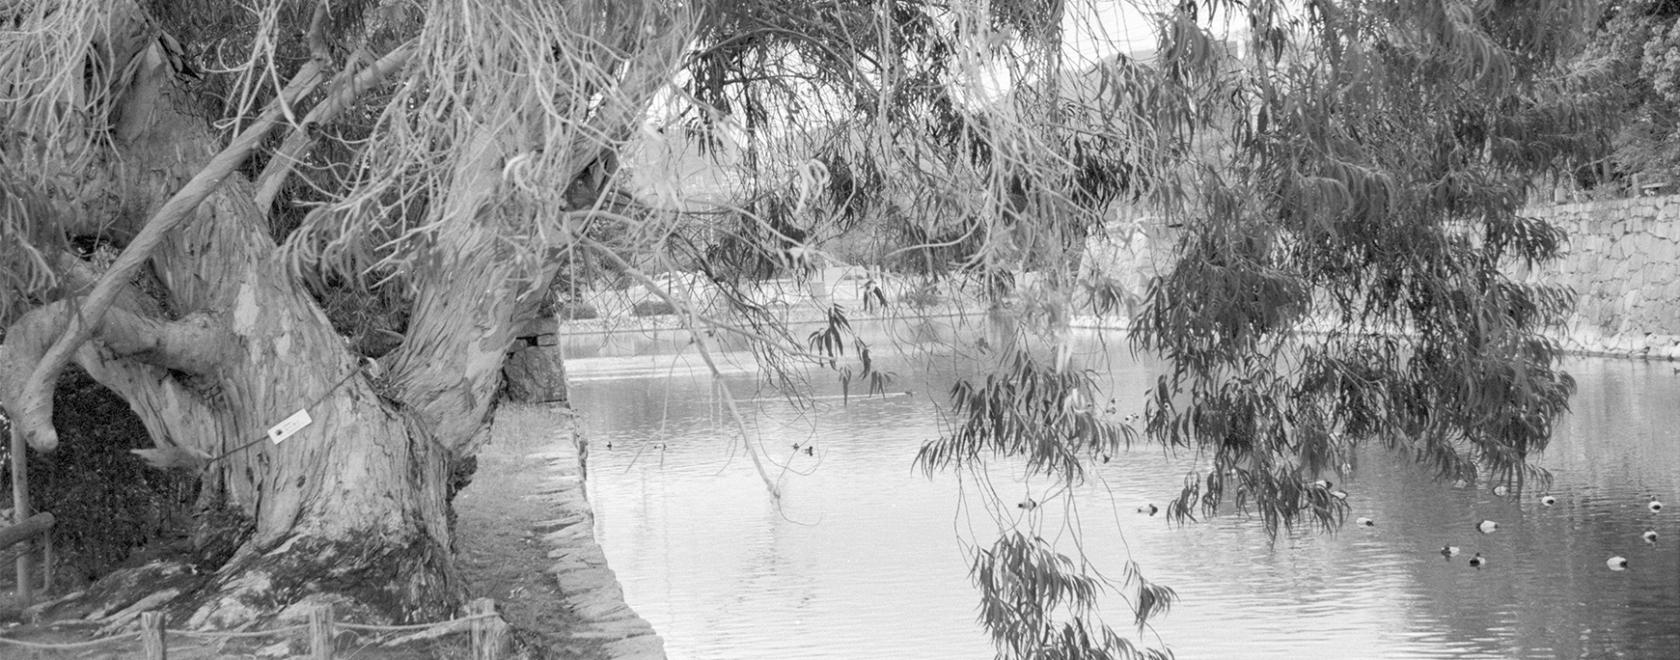 A black and white photo of a tree and a river